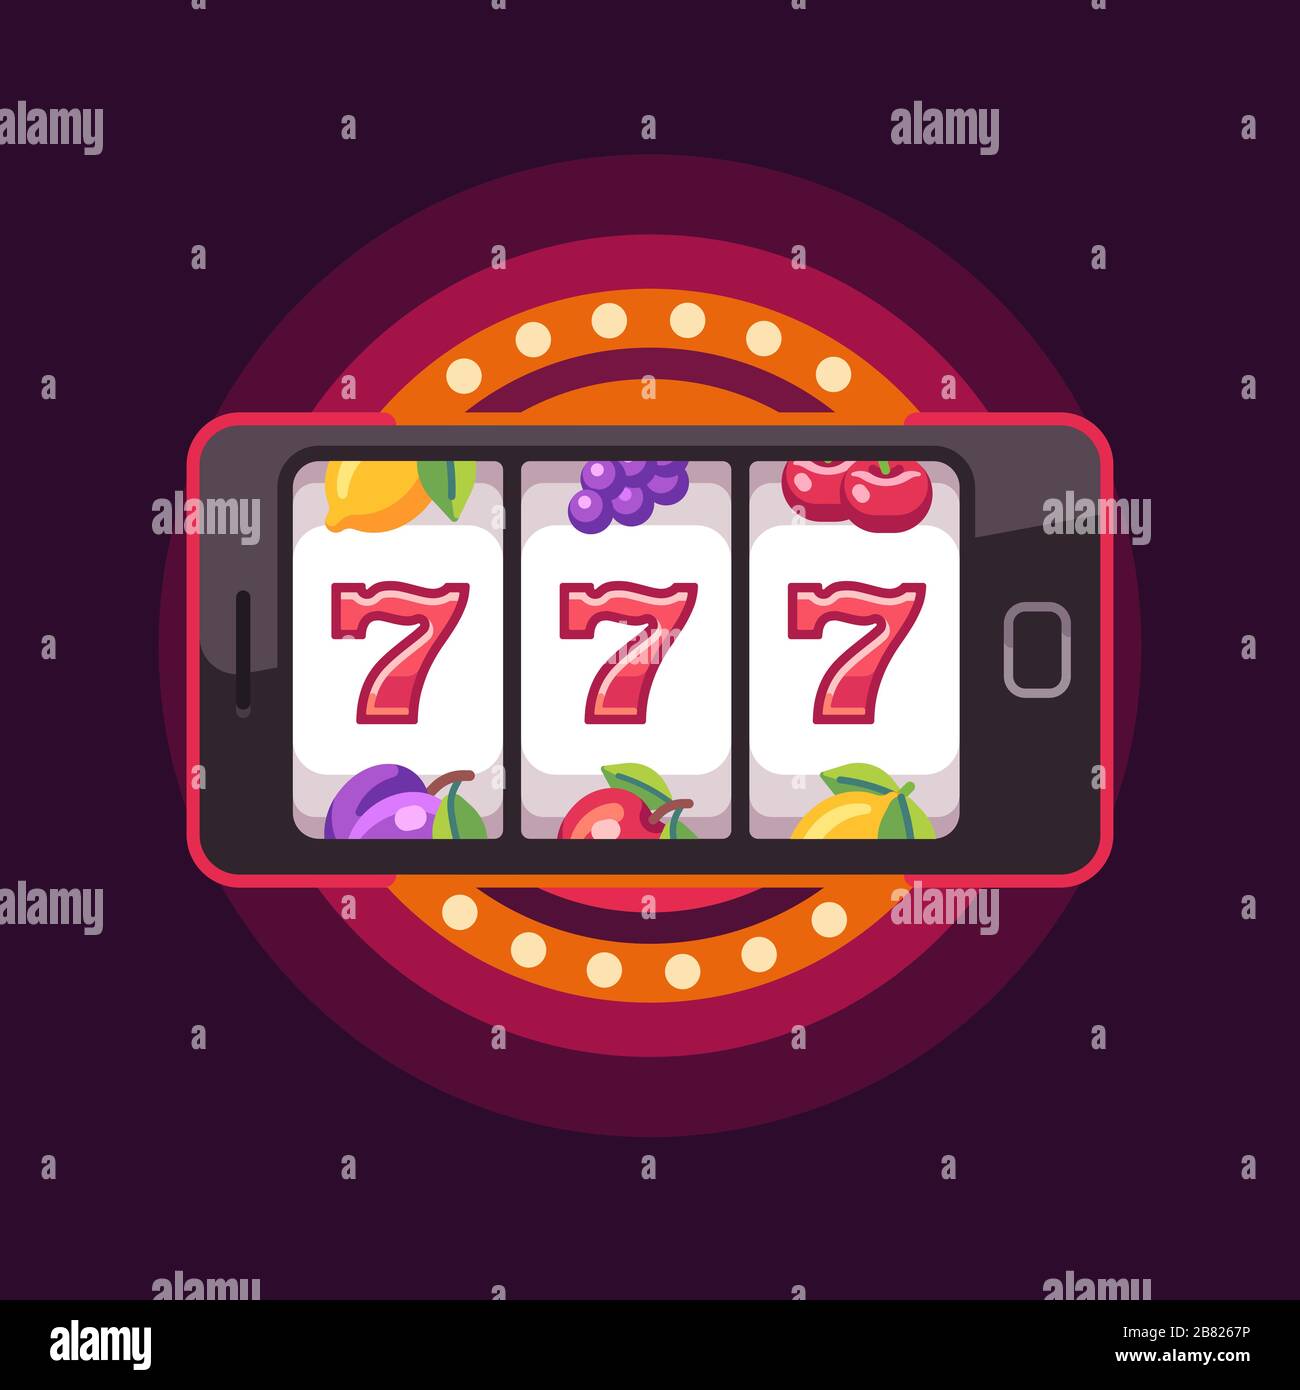 Smartphone with a slot machine on screen. Online slot game flat illustration on red background Stock Vector